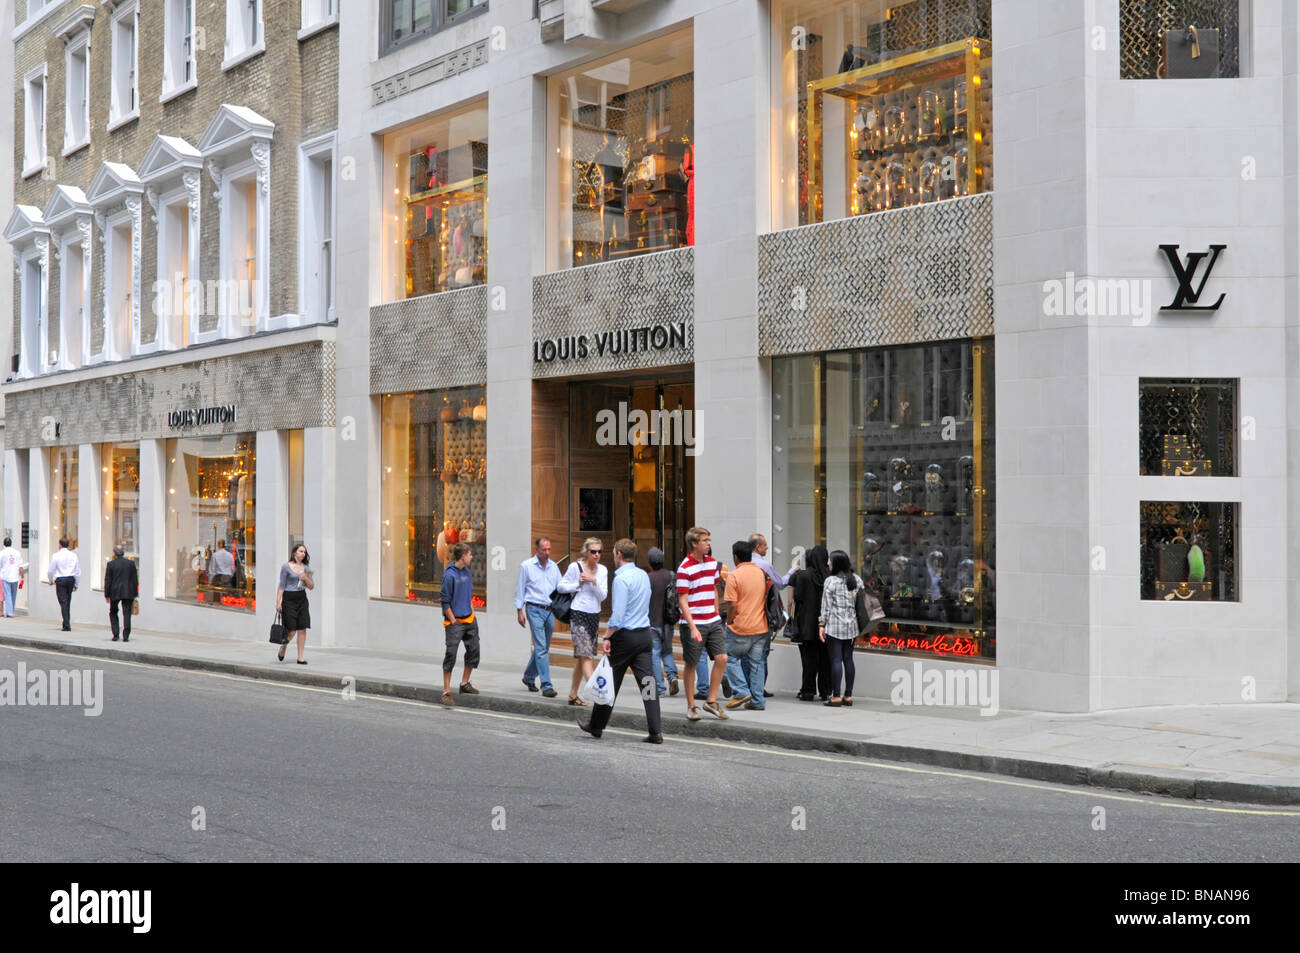 Louis Vuitton store front in London Stock Photo: 30354386 - Alamy